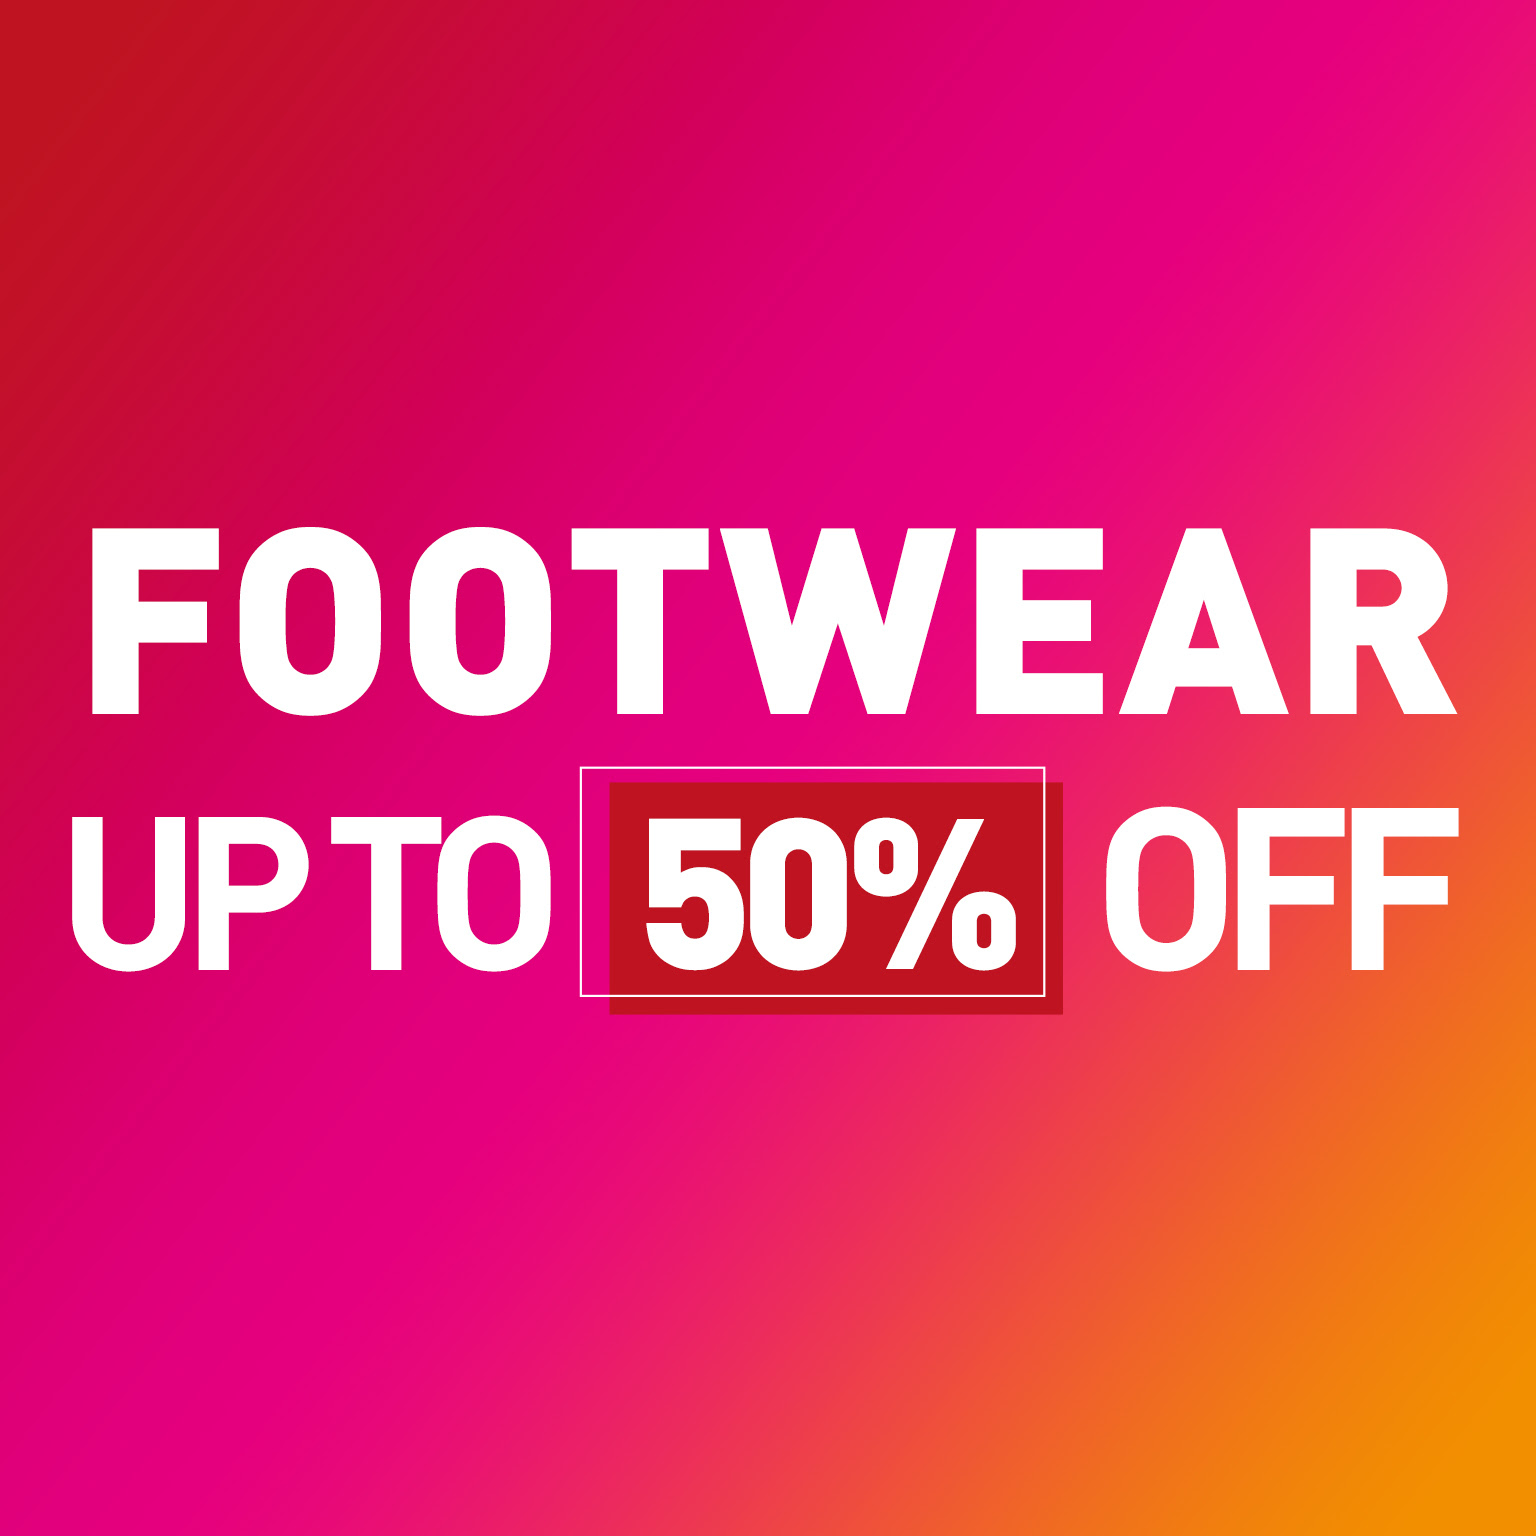 Up to 50% off footwear